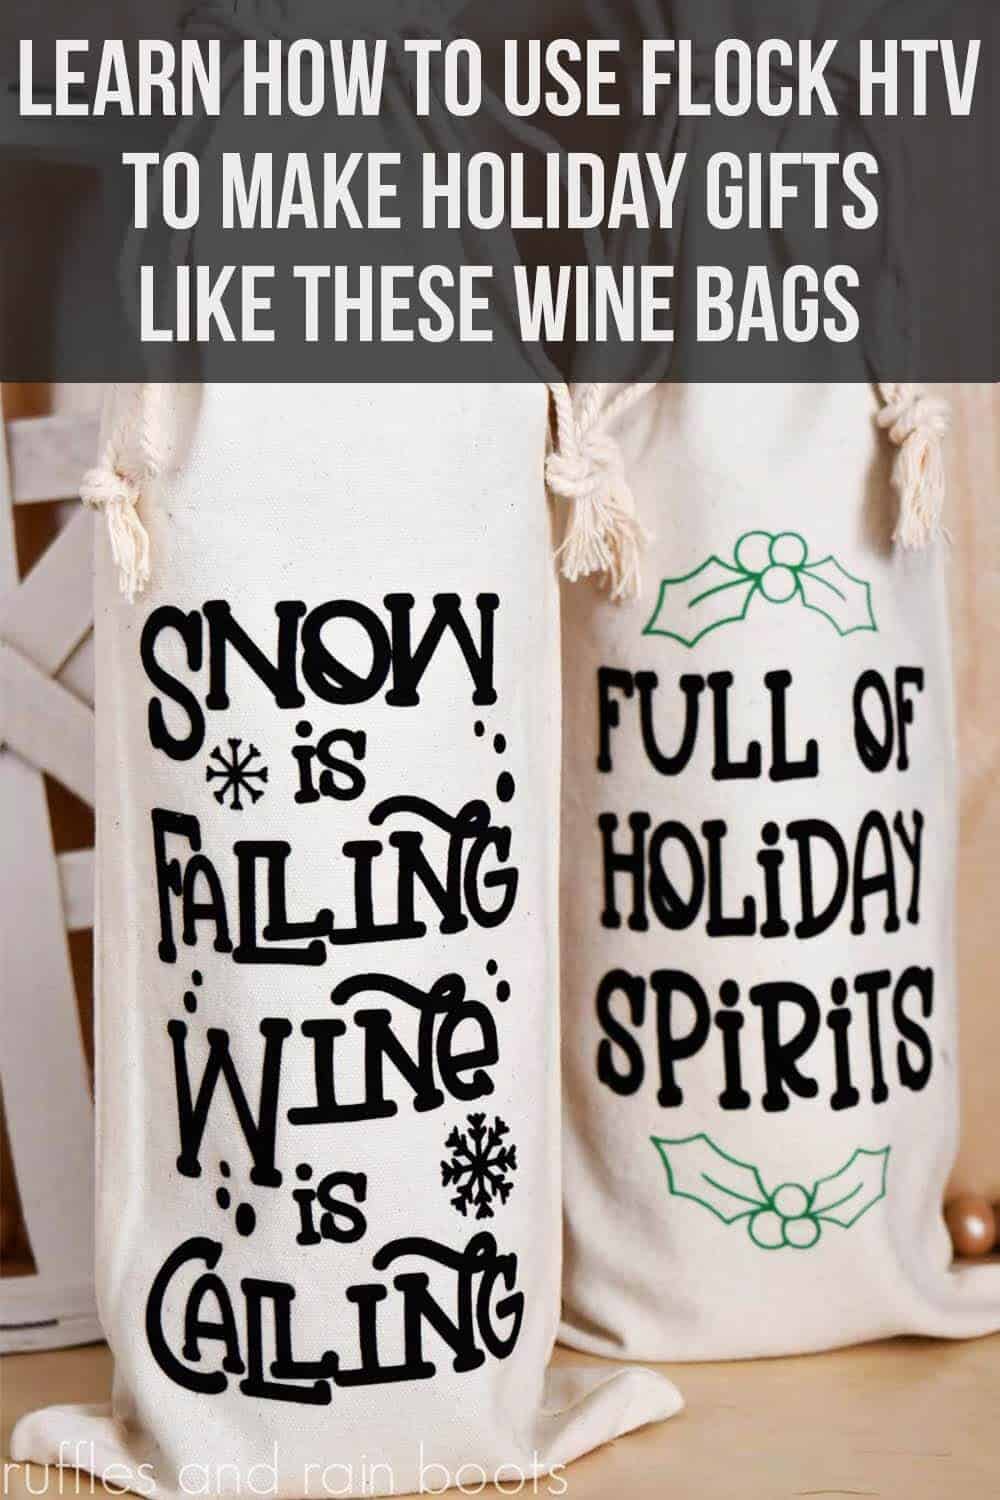 Vertical image of two Christmas wine bags made with flock heat transfer vinyl in black and green on holiday background with text which reads learn how to use flock htv to make holiday gifts like these wine bags.